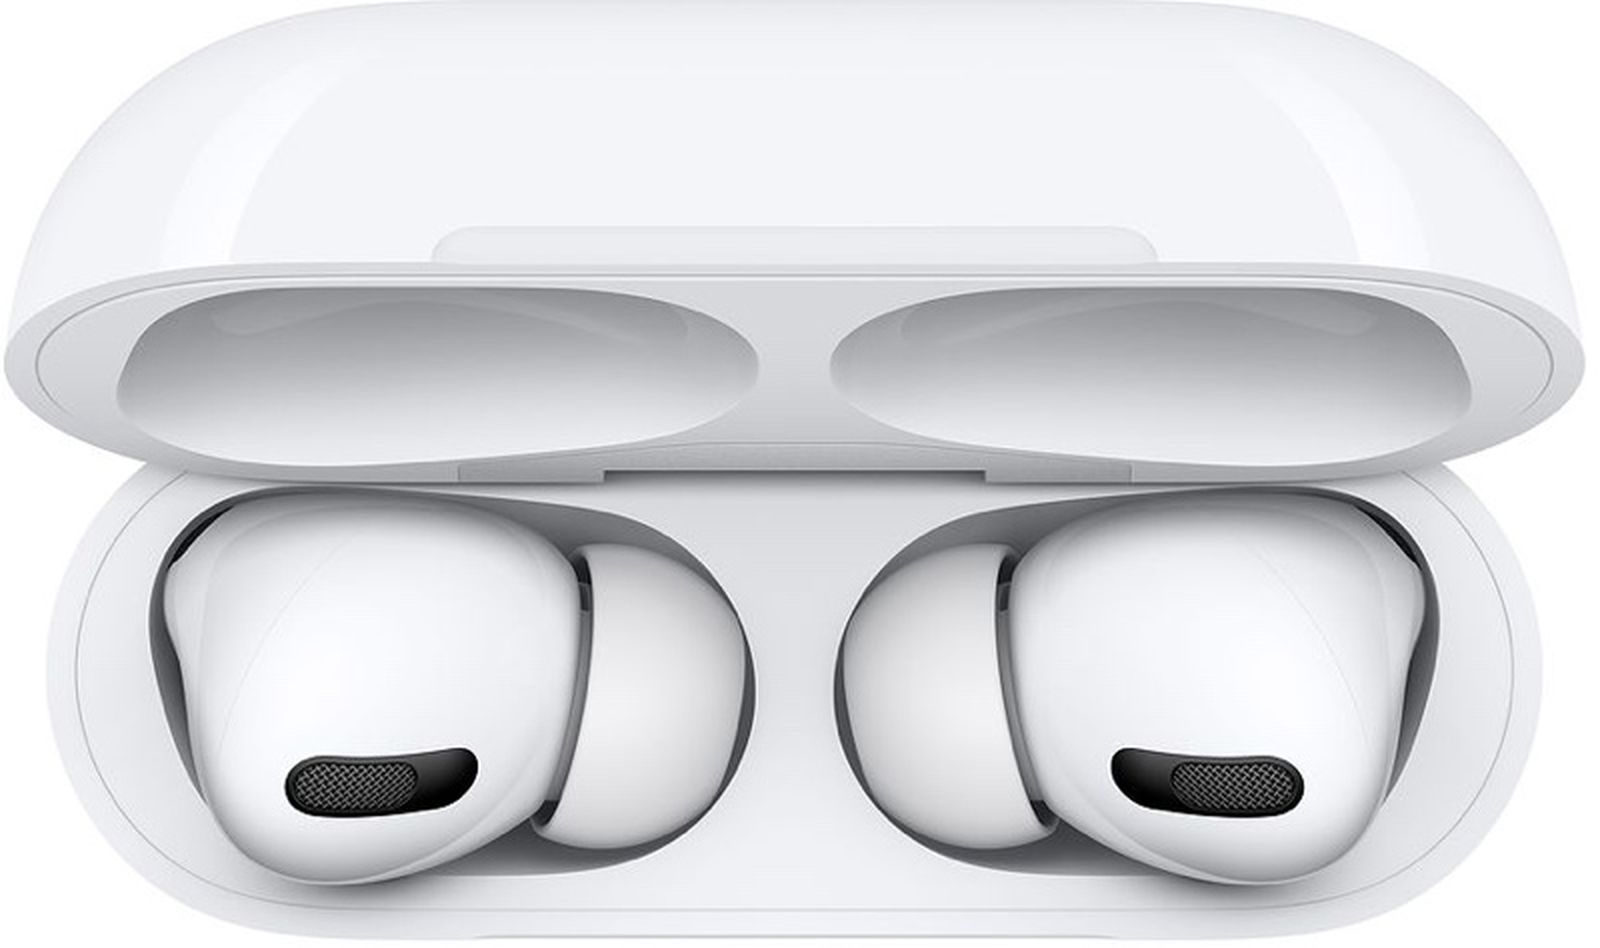 Third-Gen AirPods With AirPods Pro Design to Cost $200 and Launch in First  Half of 2021 - MacRumors